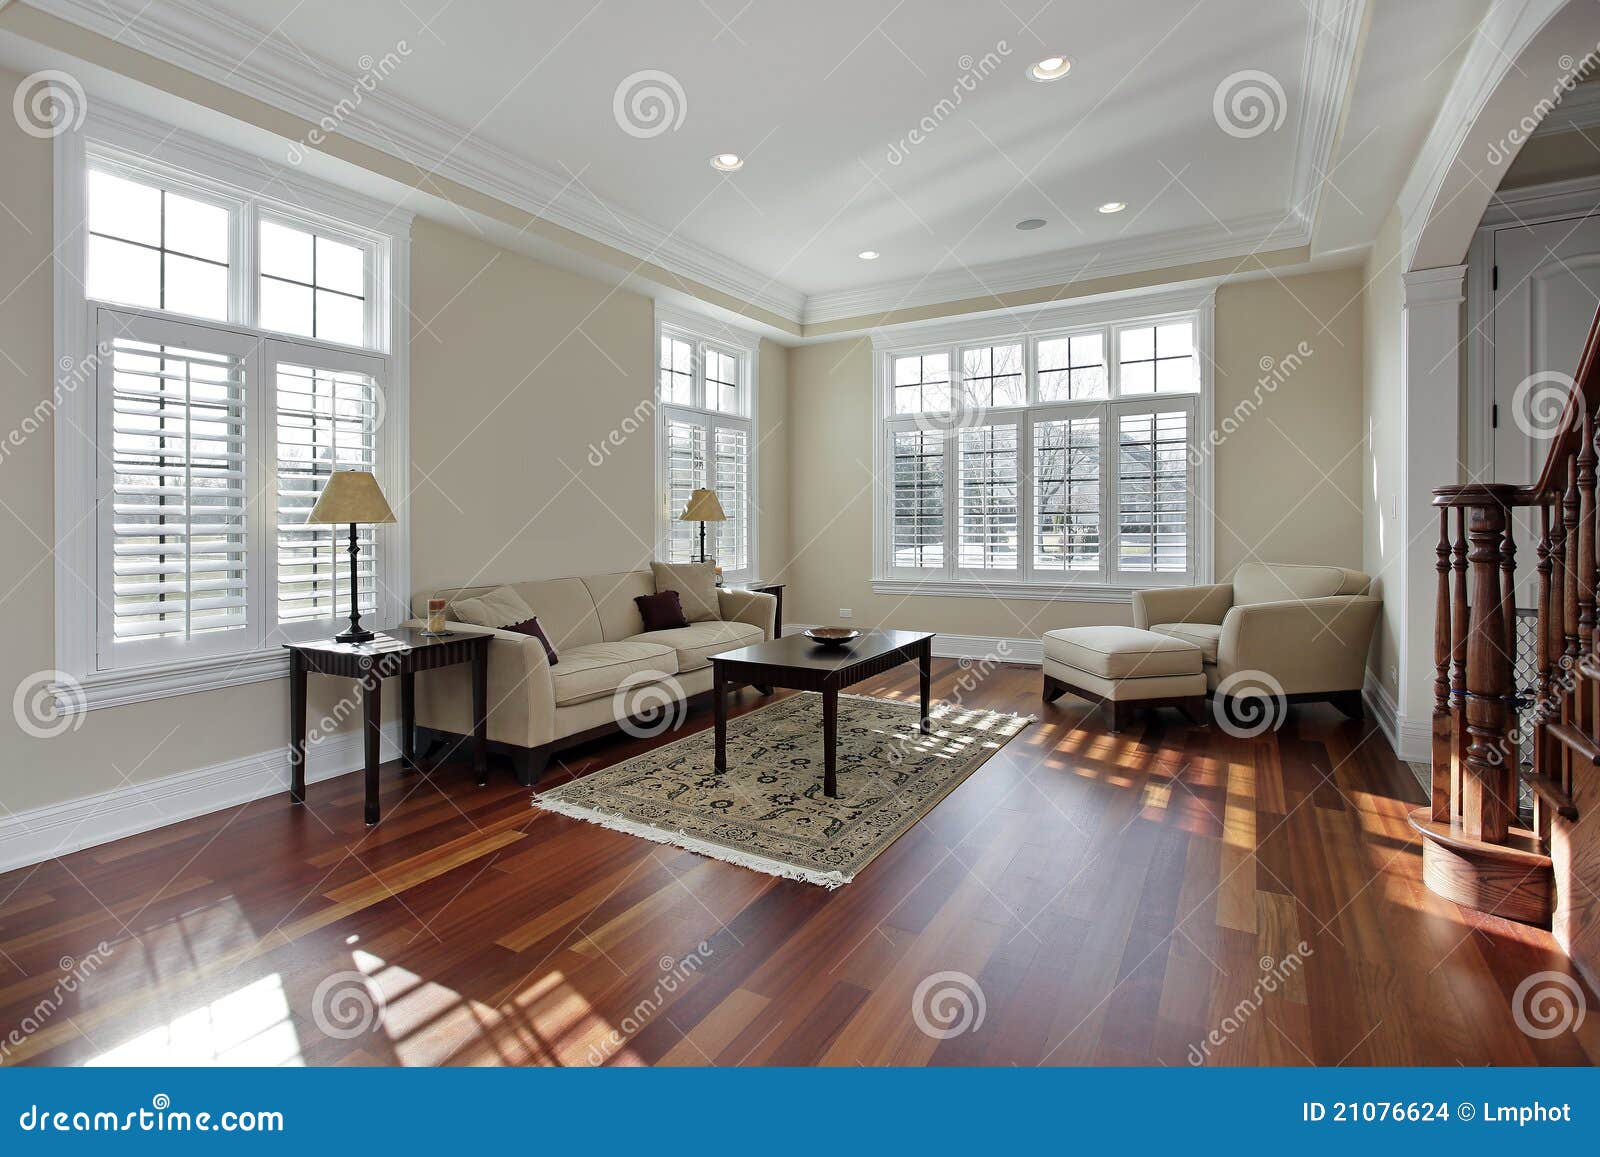 Living Room with Cherry Wood Flooring Stock Photo   Image of ...